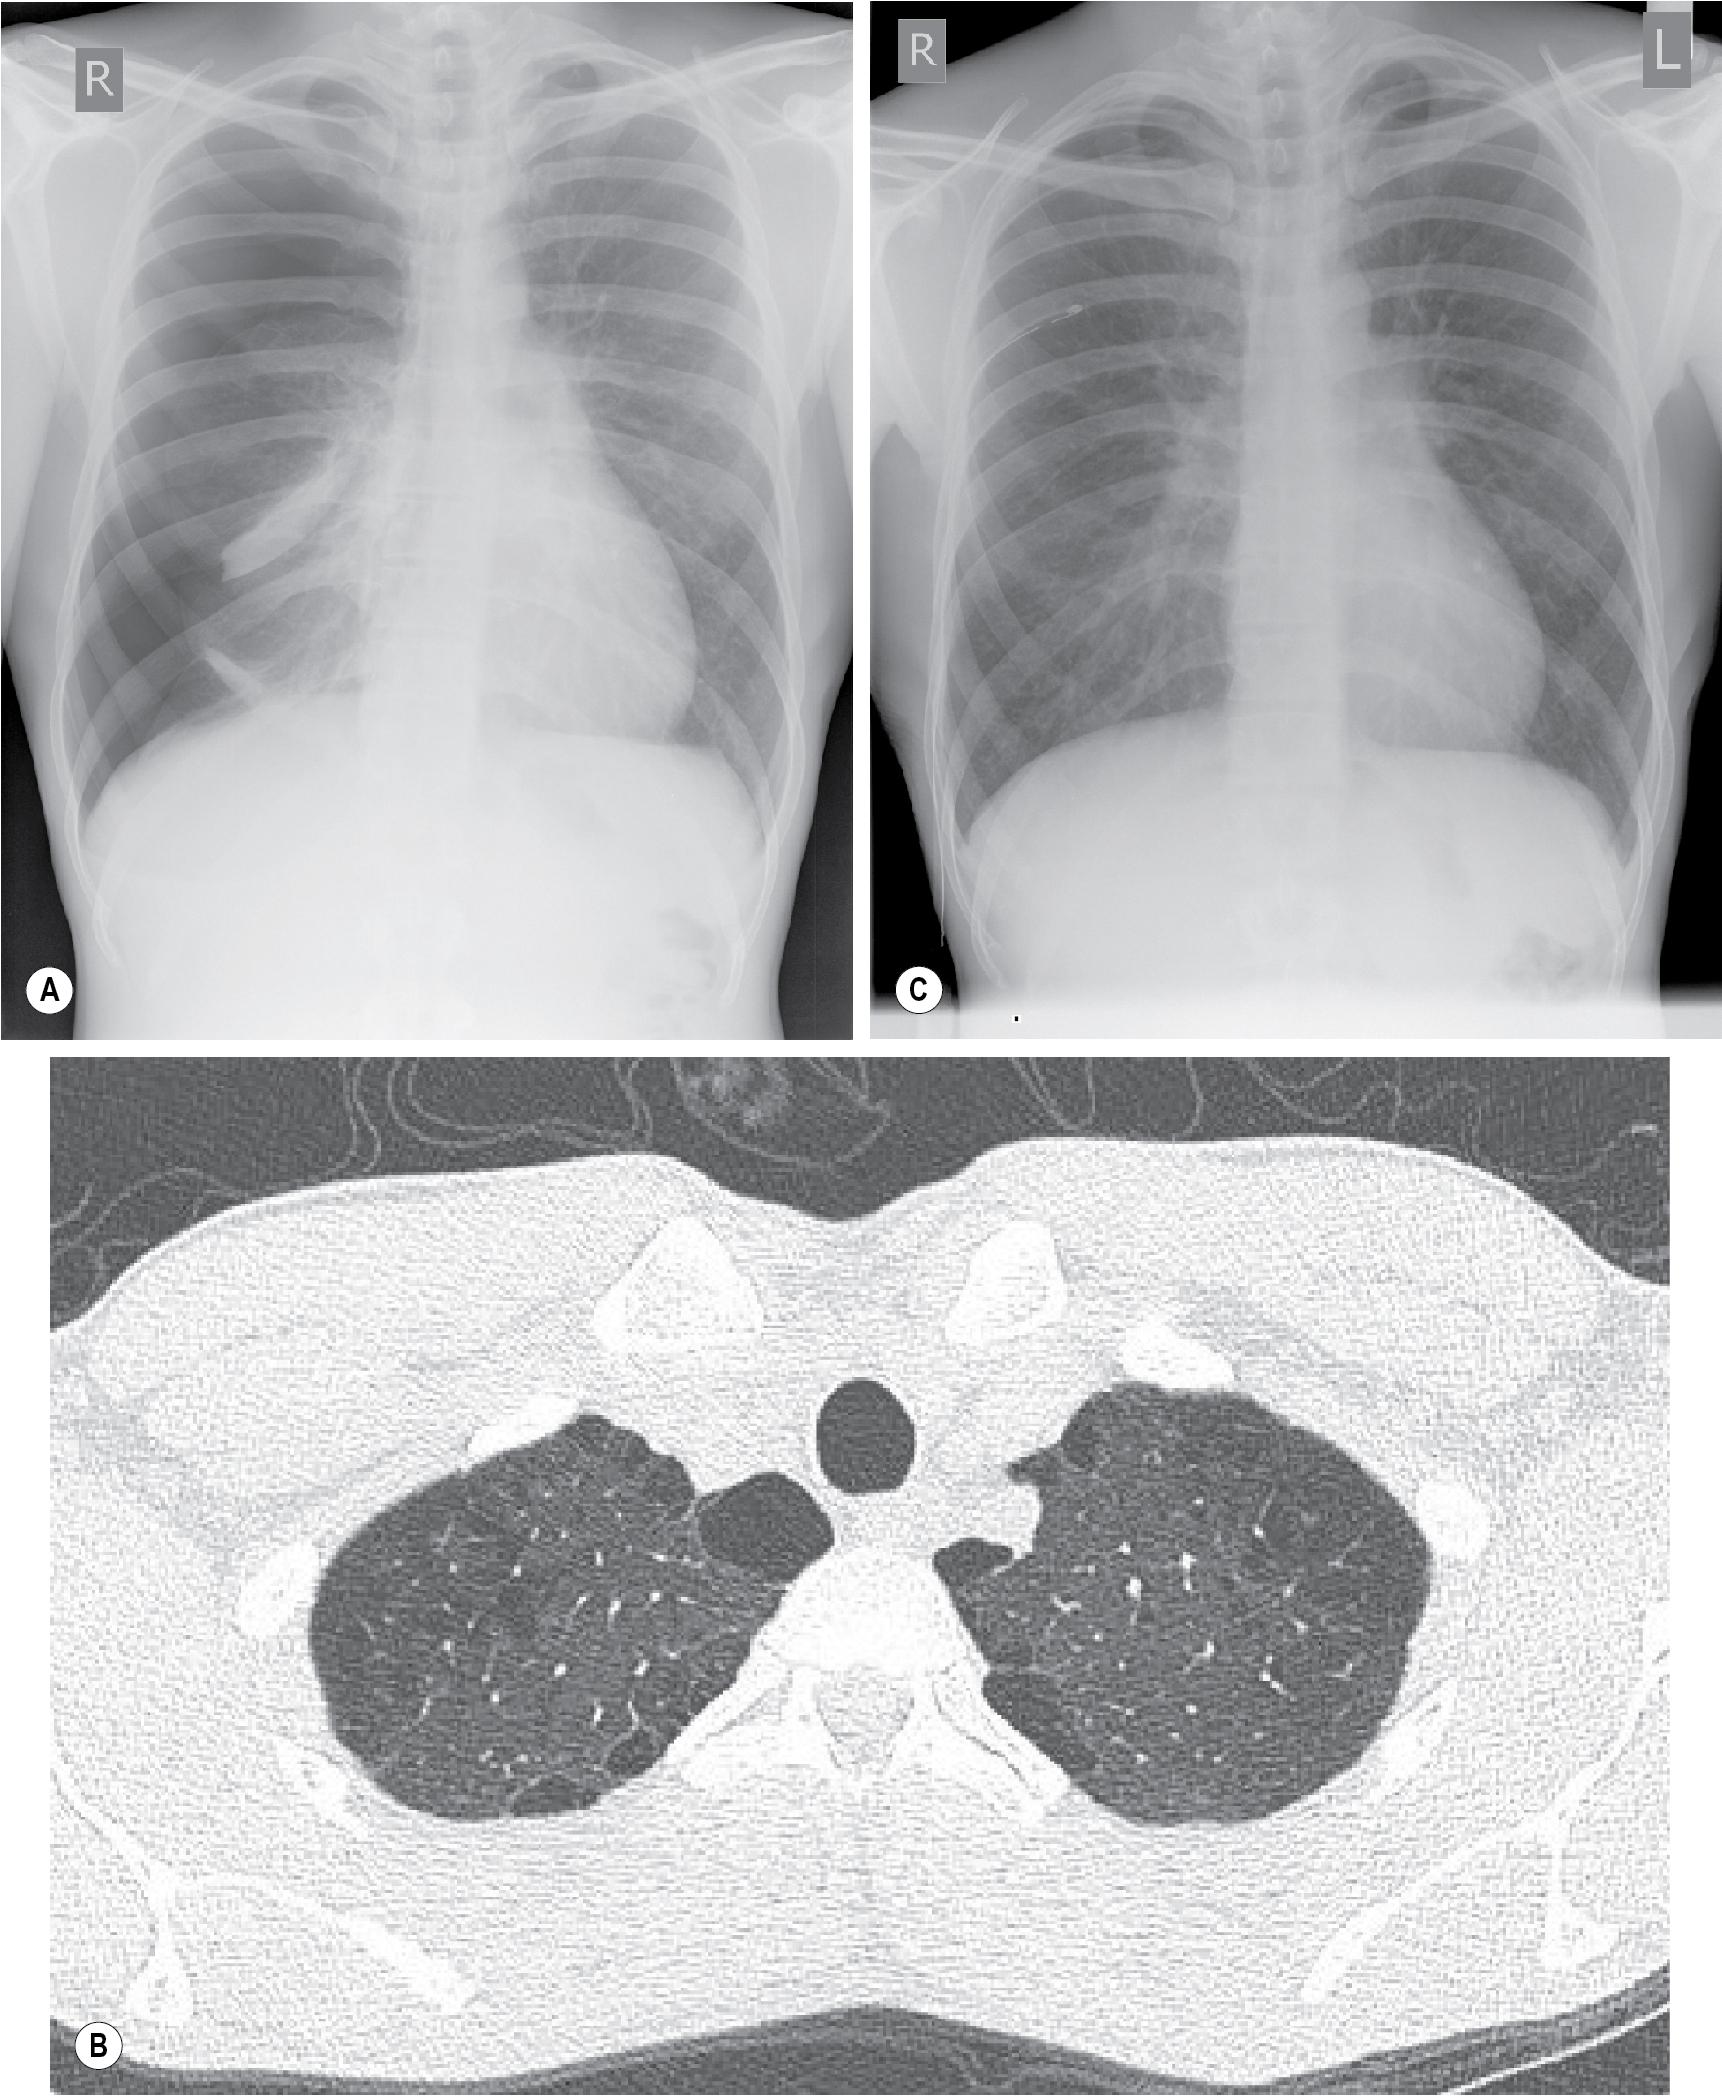 • Fig. 30.5, (A) Spontaneous pneumothorax with almost complete collapse of the right lung. (B) Computed tomography scan of the lung apices in the same patient showing multiple lung blebs. (C) The pneumothorax has been treated by the insertion of a chest drain, with complete reexpansion of the lung.